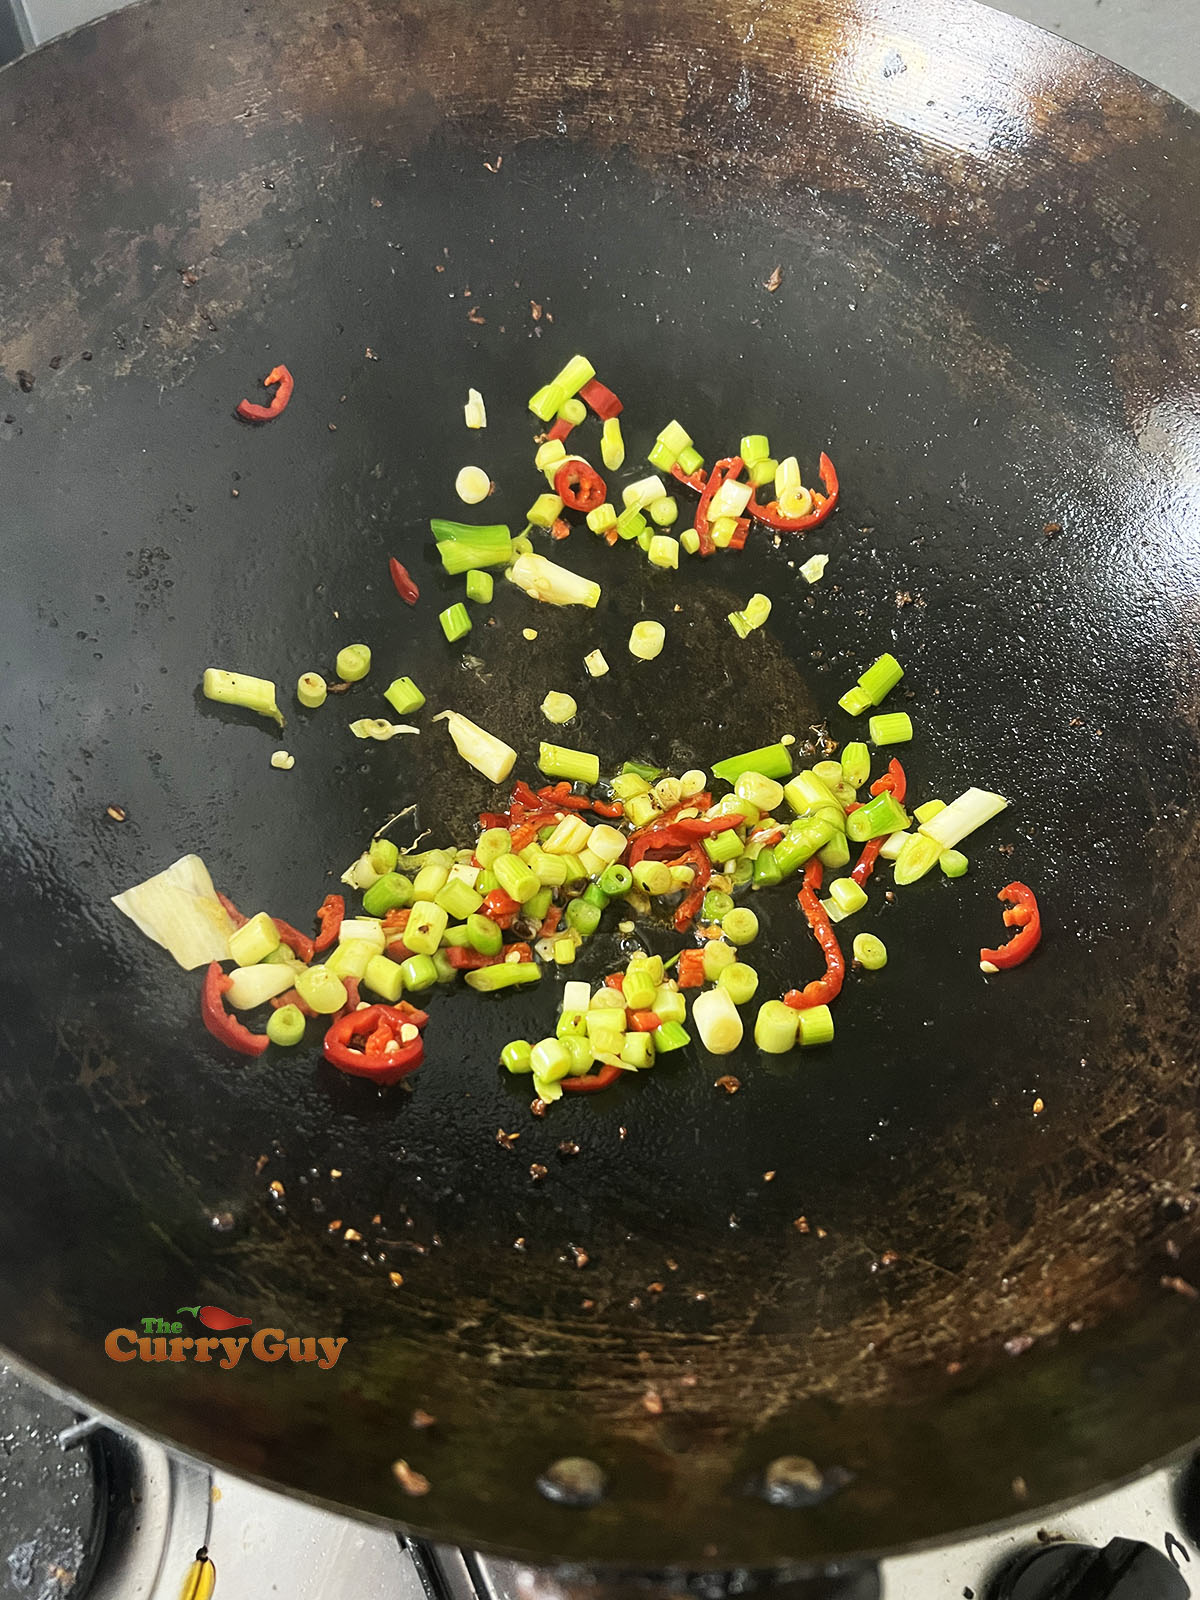 Frying spring onions (scallions) and chillies